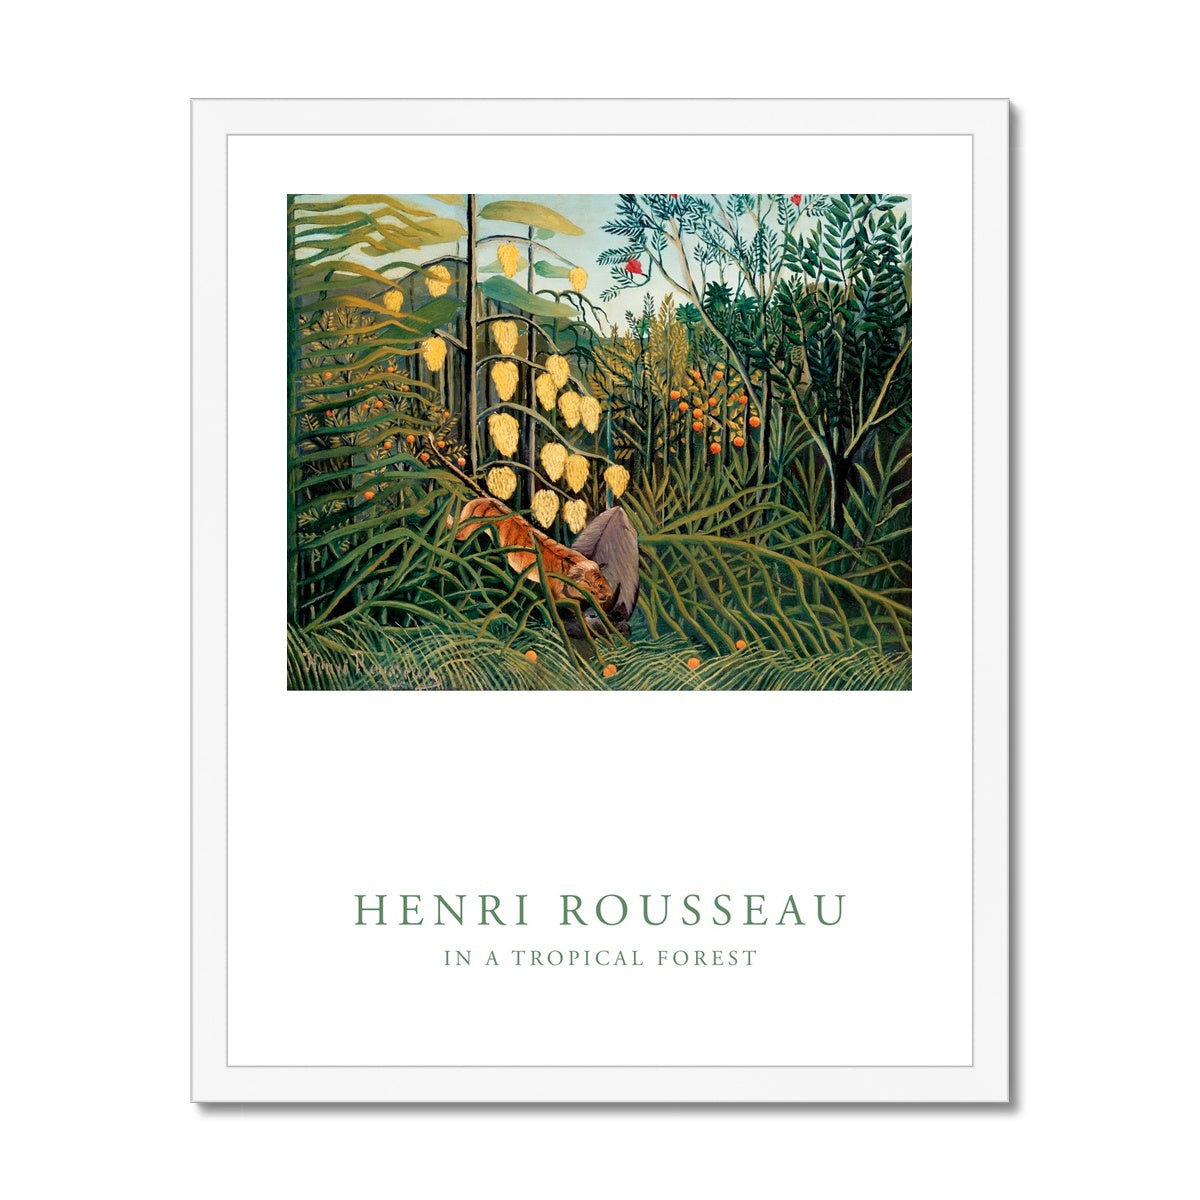 Rousseau -  In a Tropical Forest gerahmtes Poster - Atopurinto